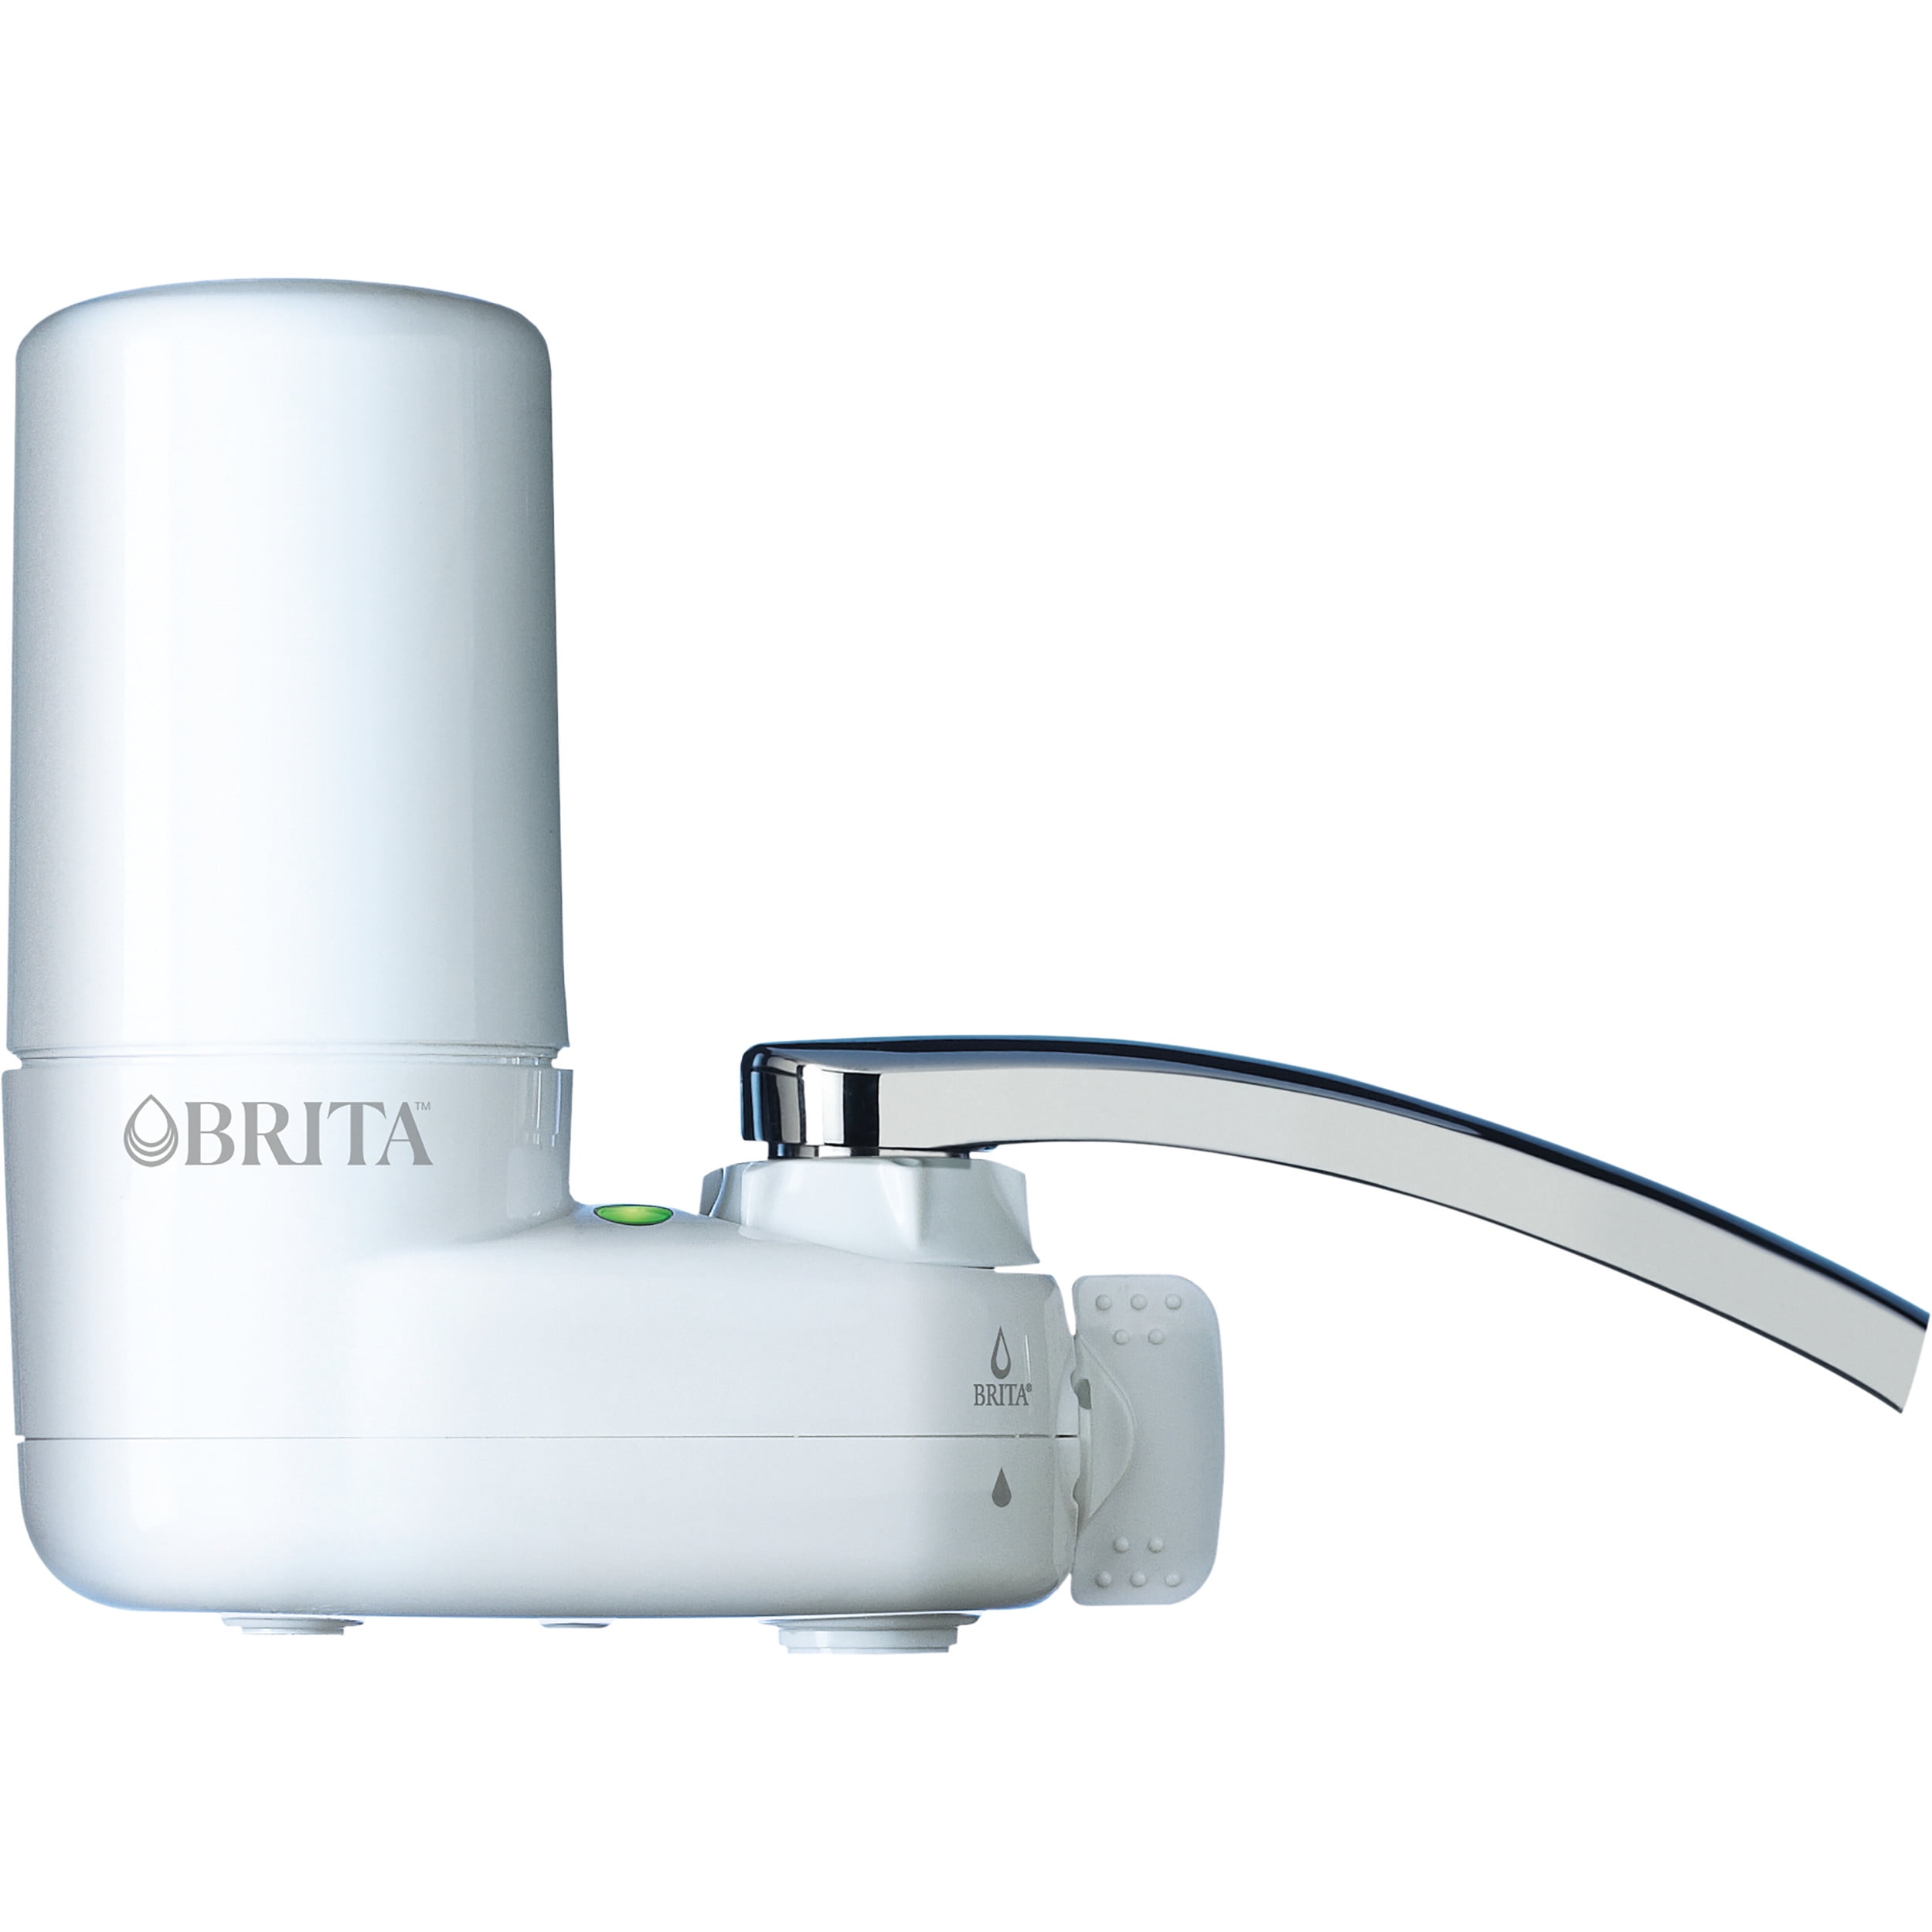 Brita On Tap System Faucet Mount Water Filter - Gillman Home Center